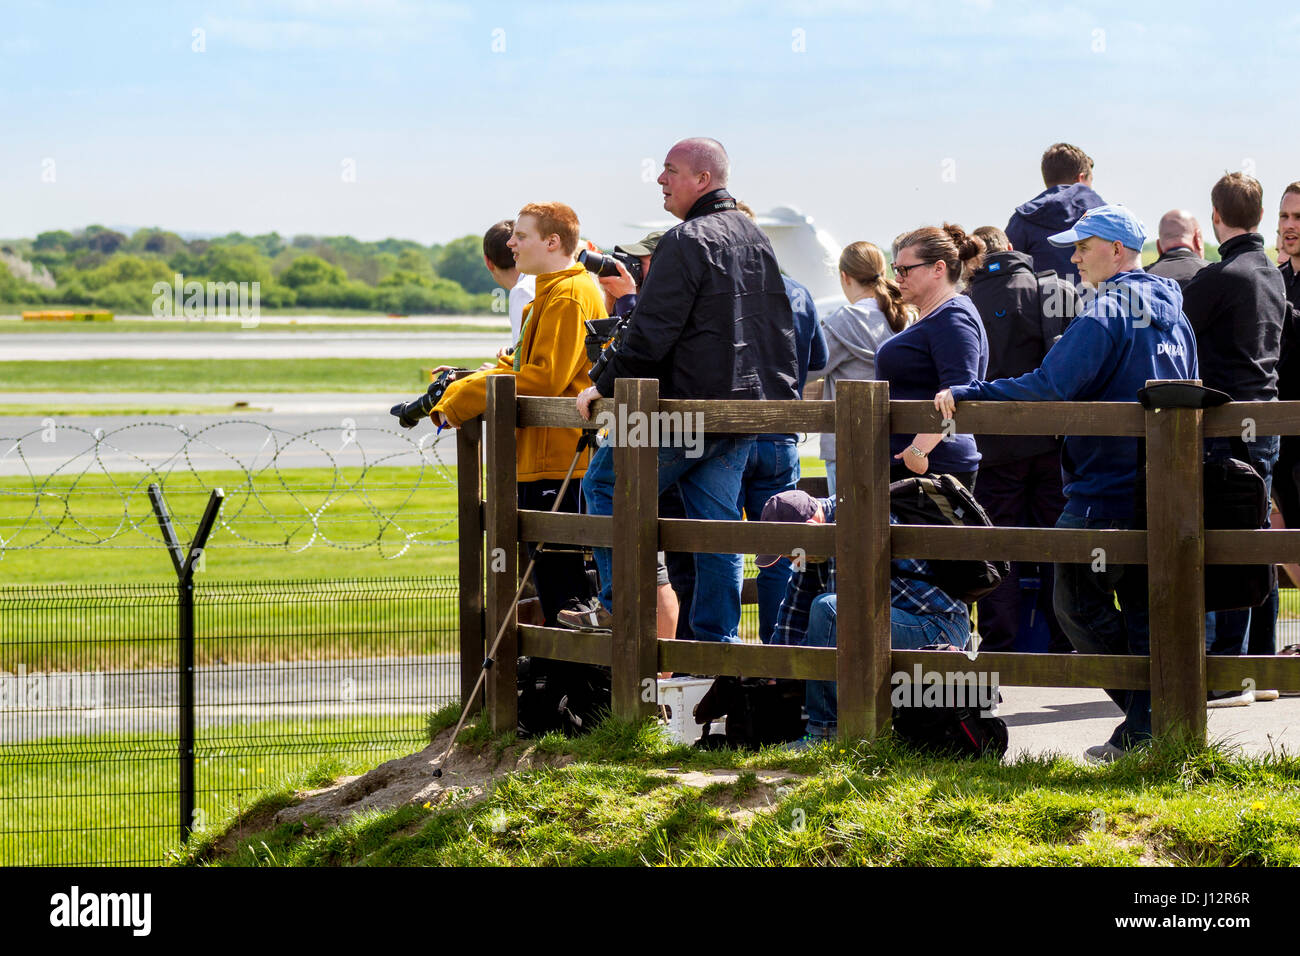 Planespotters watching aircraft at Manchester Airport Aviation Viewing Park Stock Photo